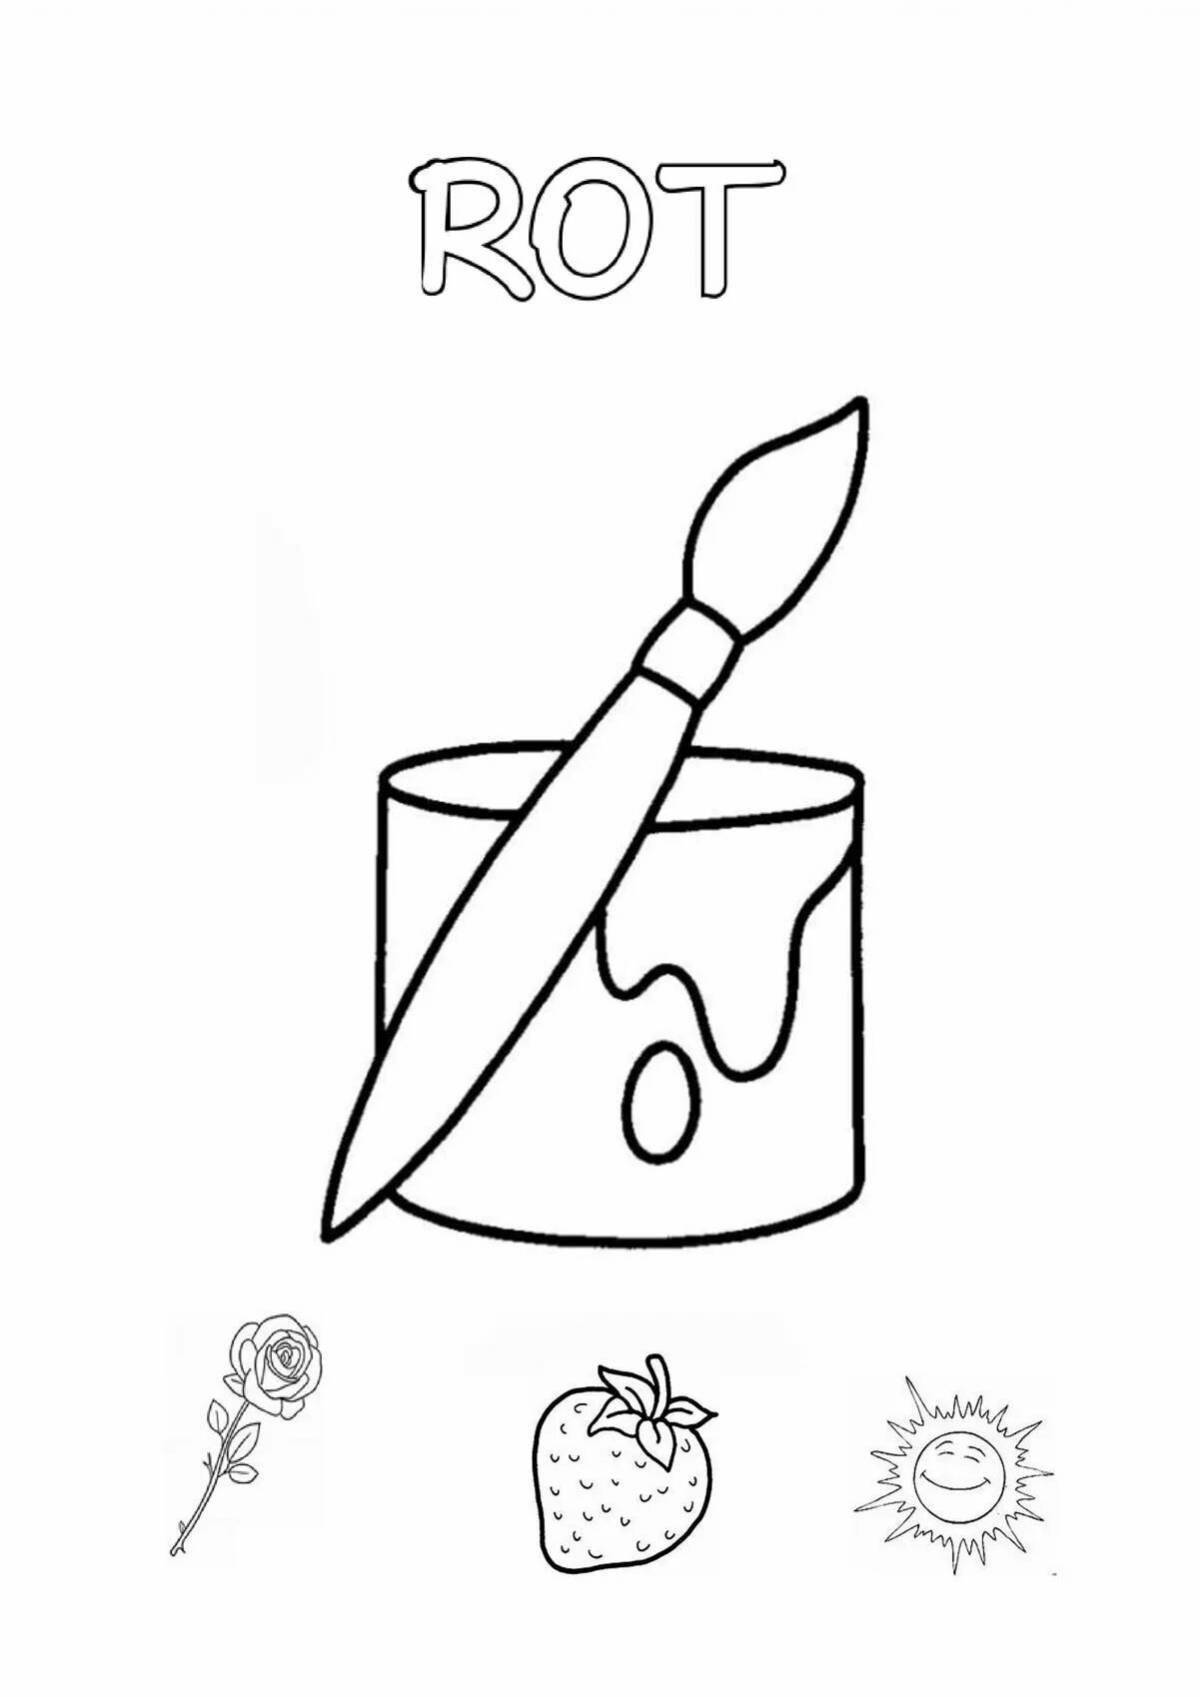 Colored coloring pages for children from 3 years old